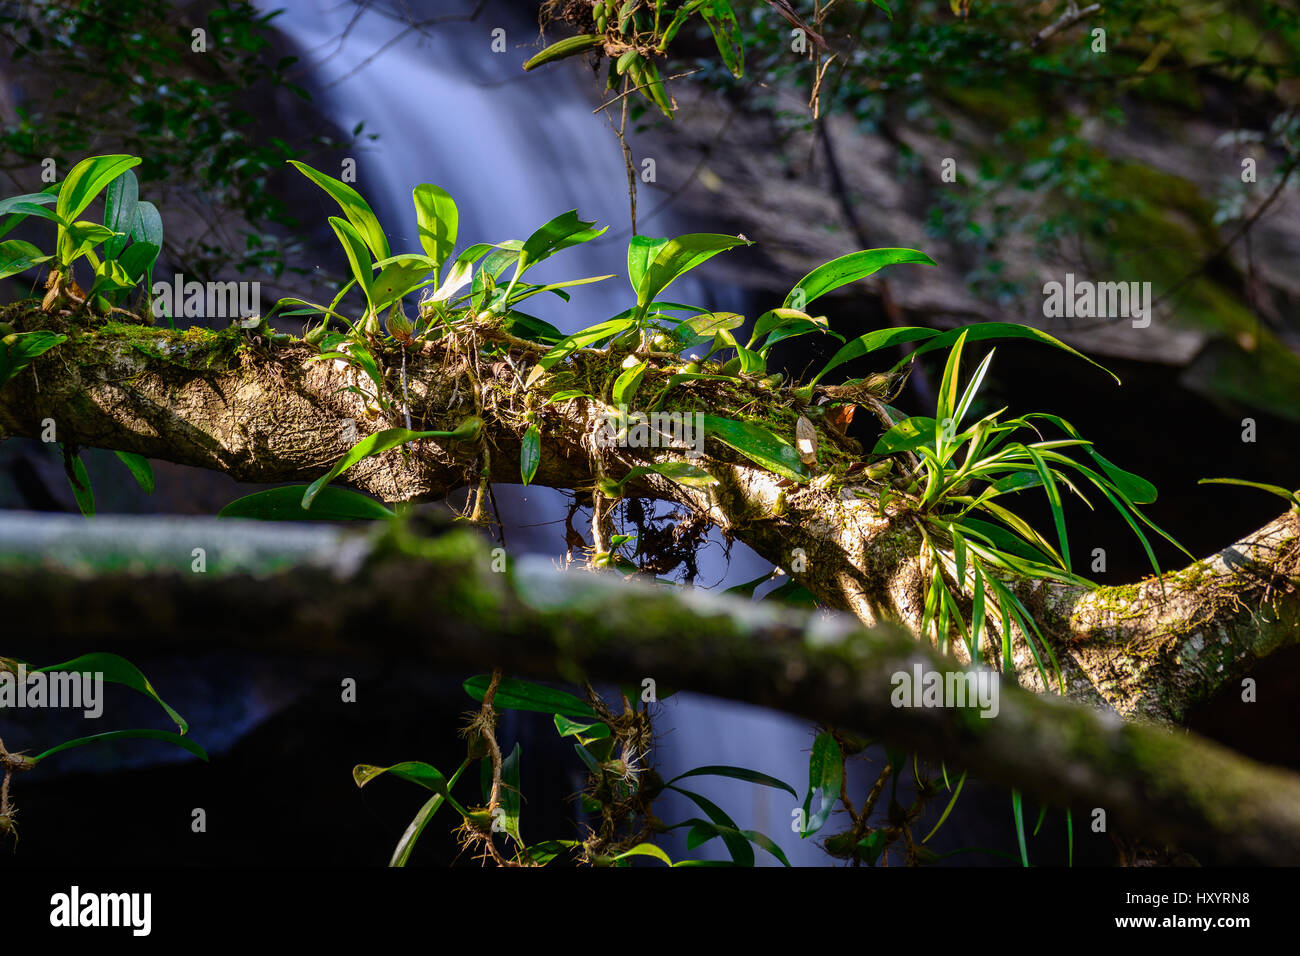 Epiphytic orchids Depending on the branch near waterfall. Stock Photo